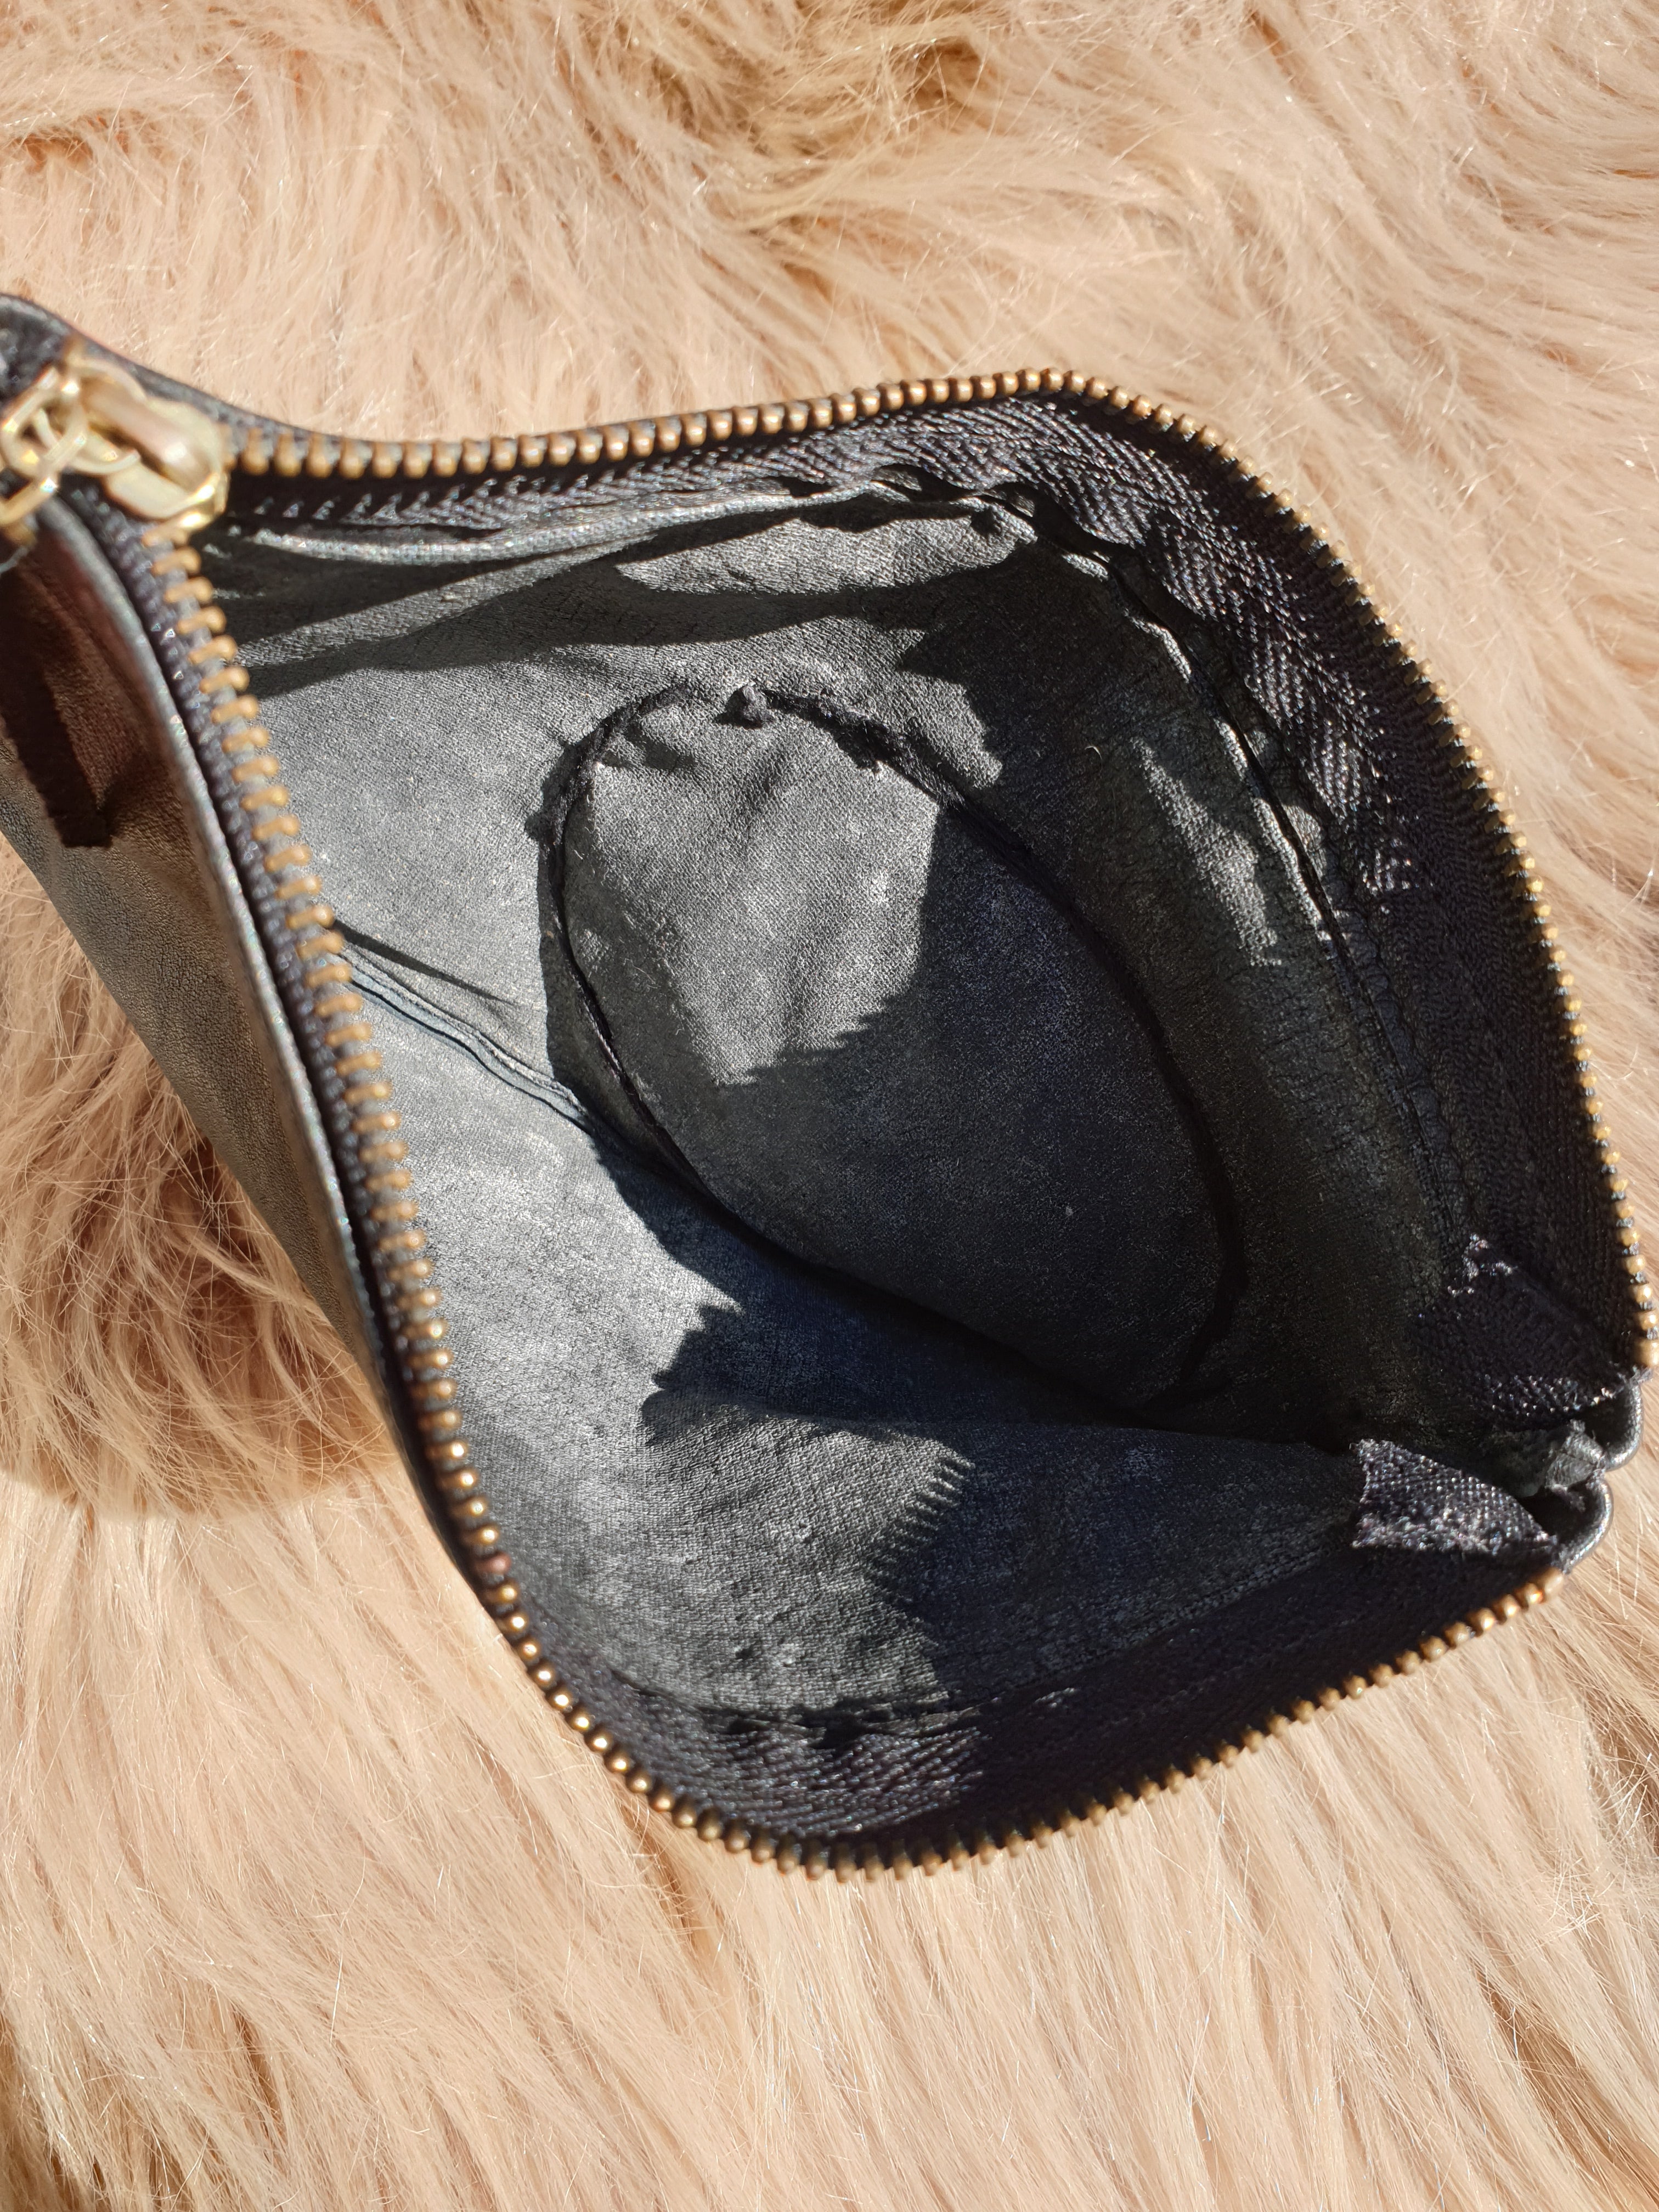 Vintage Leather Stash Pouch & Bunny Patch